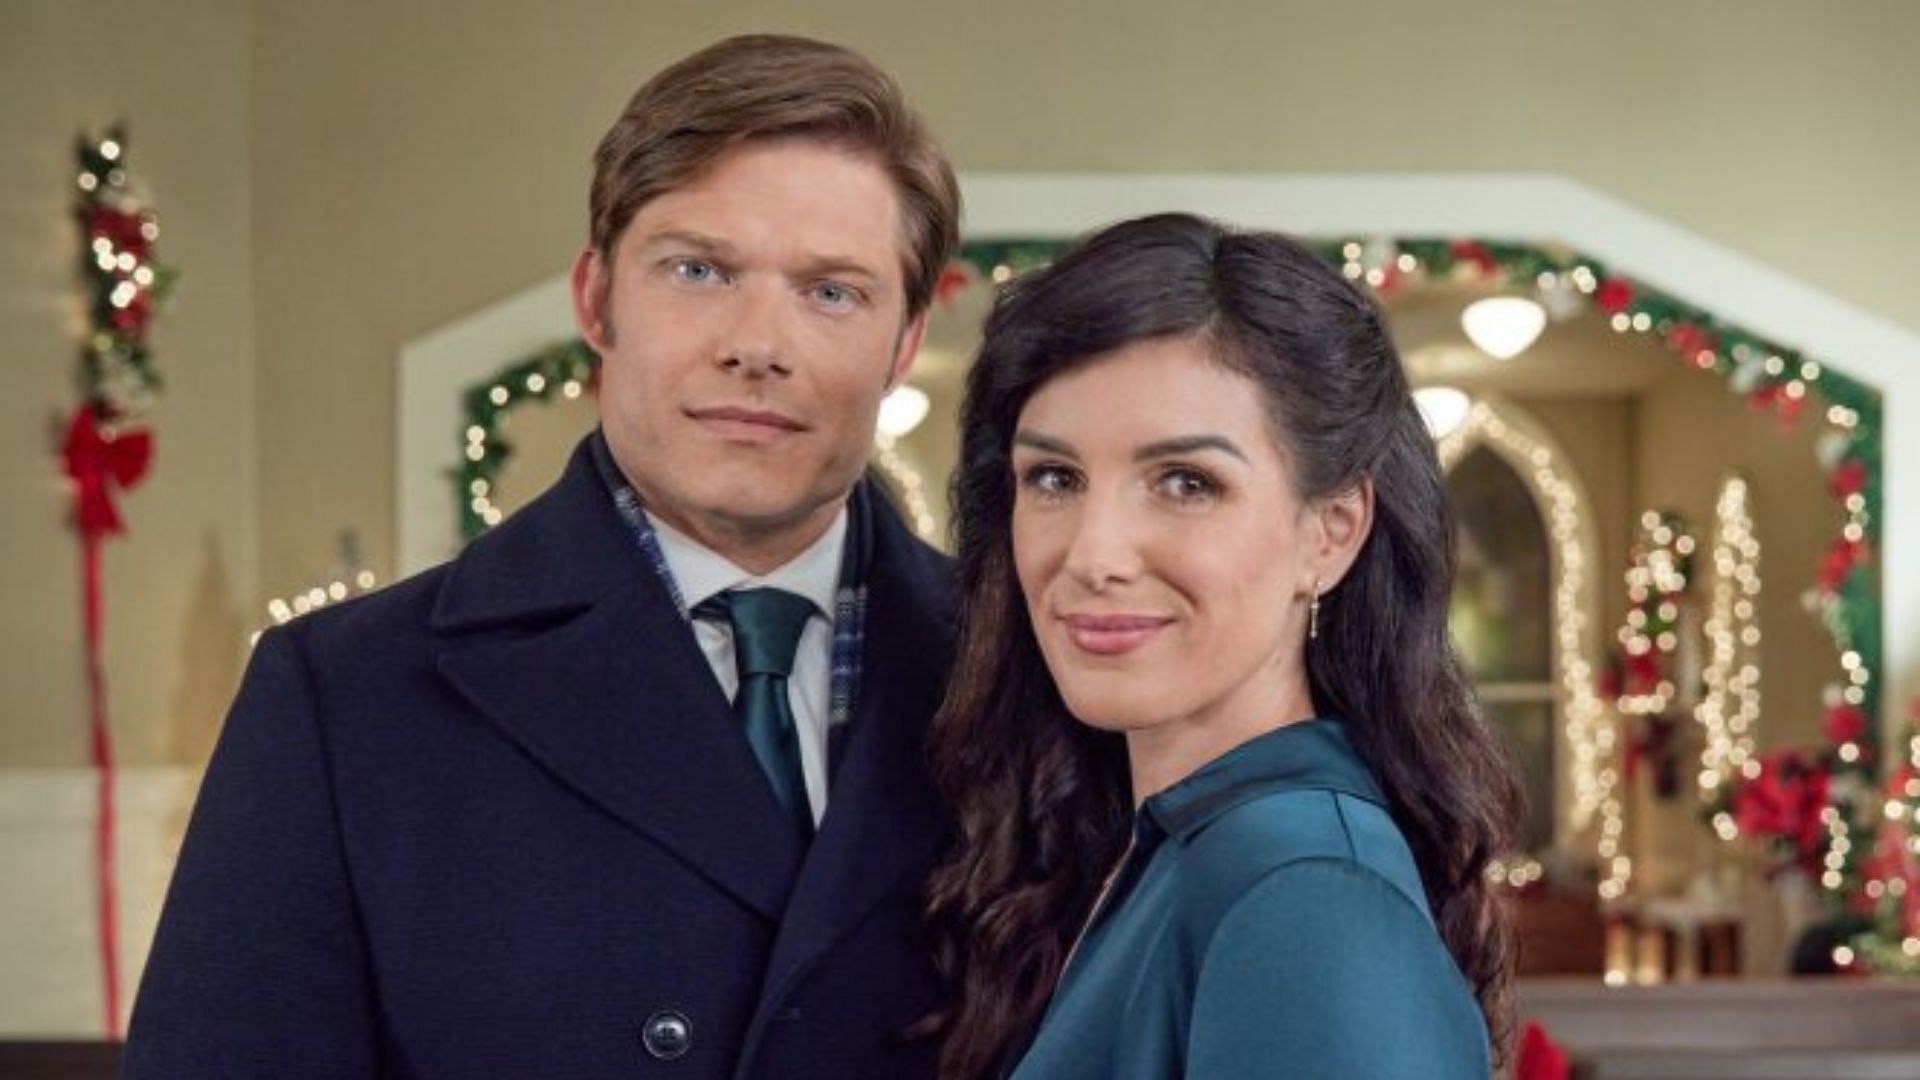 Time For Her to Come Home For Christmas promotional picture (Image via Hallmark)